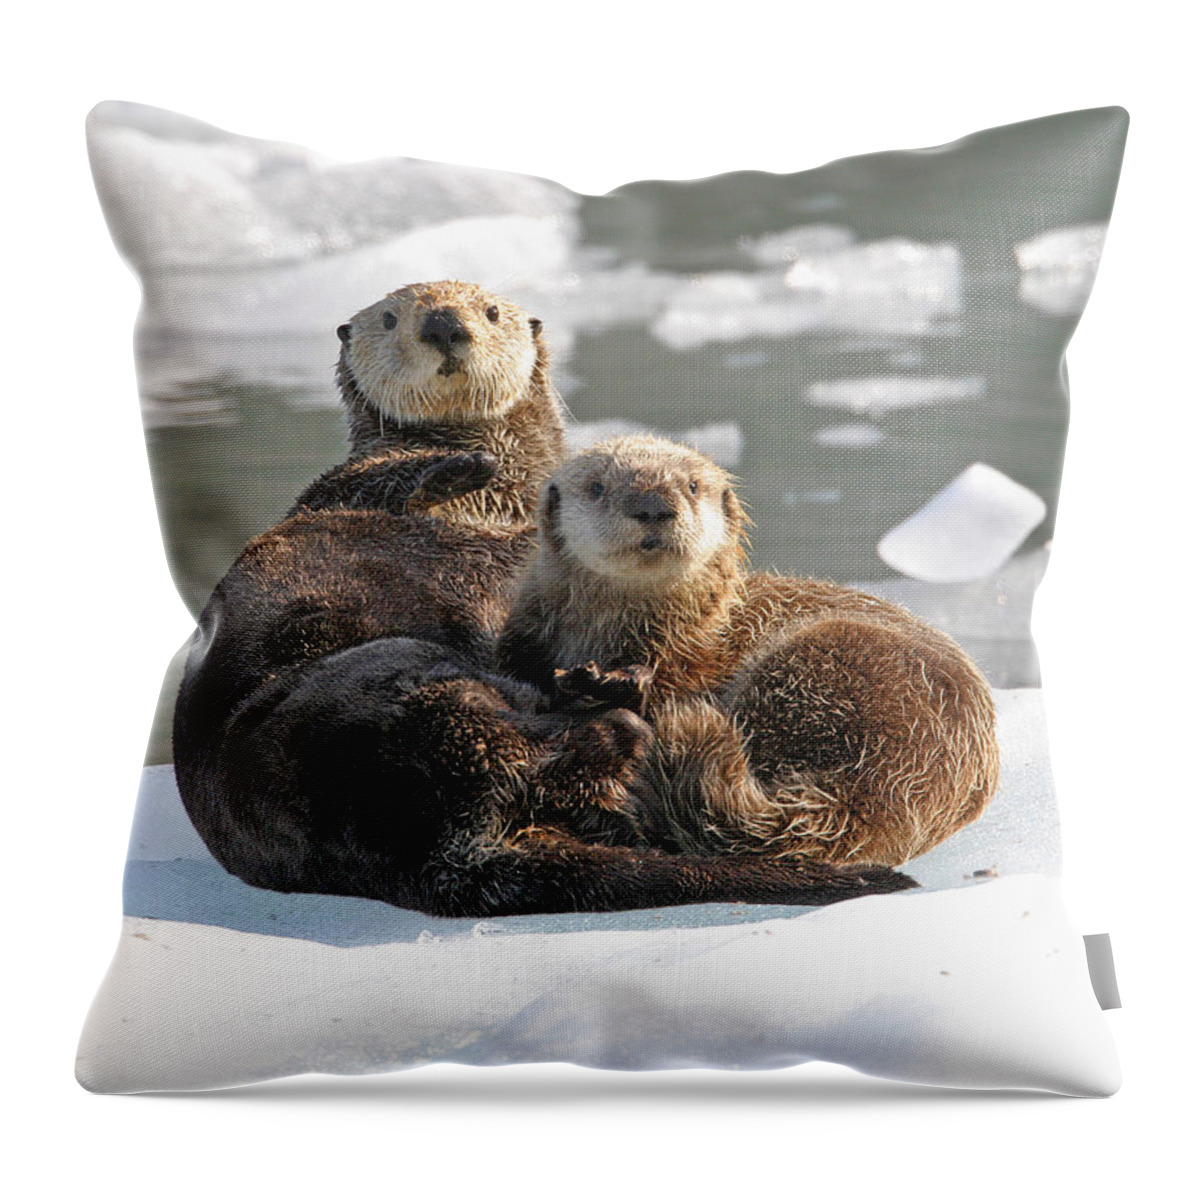 Flpa Throw Pillow featuring the photograph Sea Otter Enhydra Lutris Female by Michael Gore